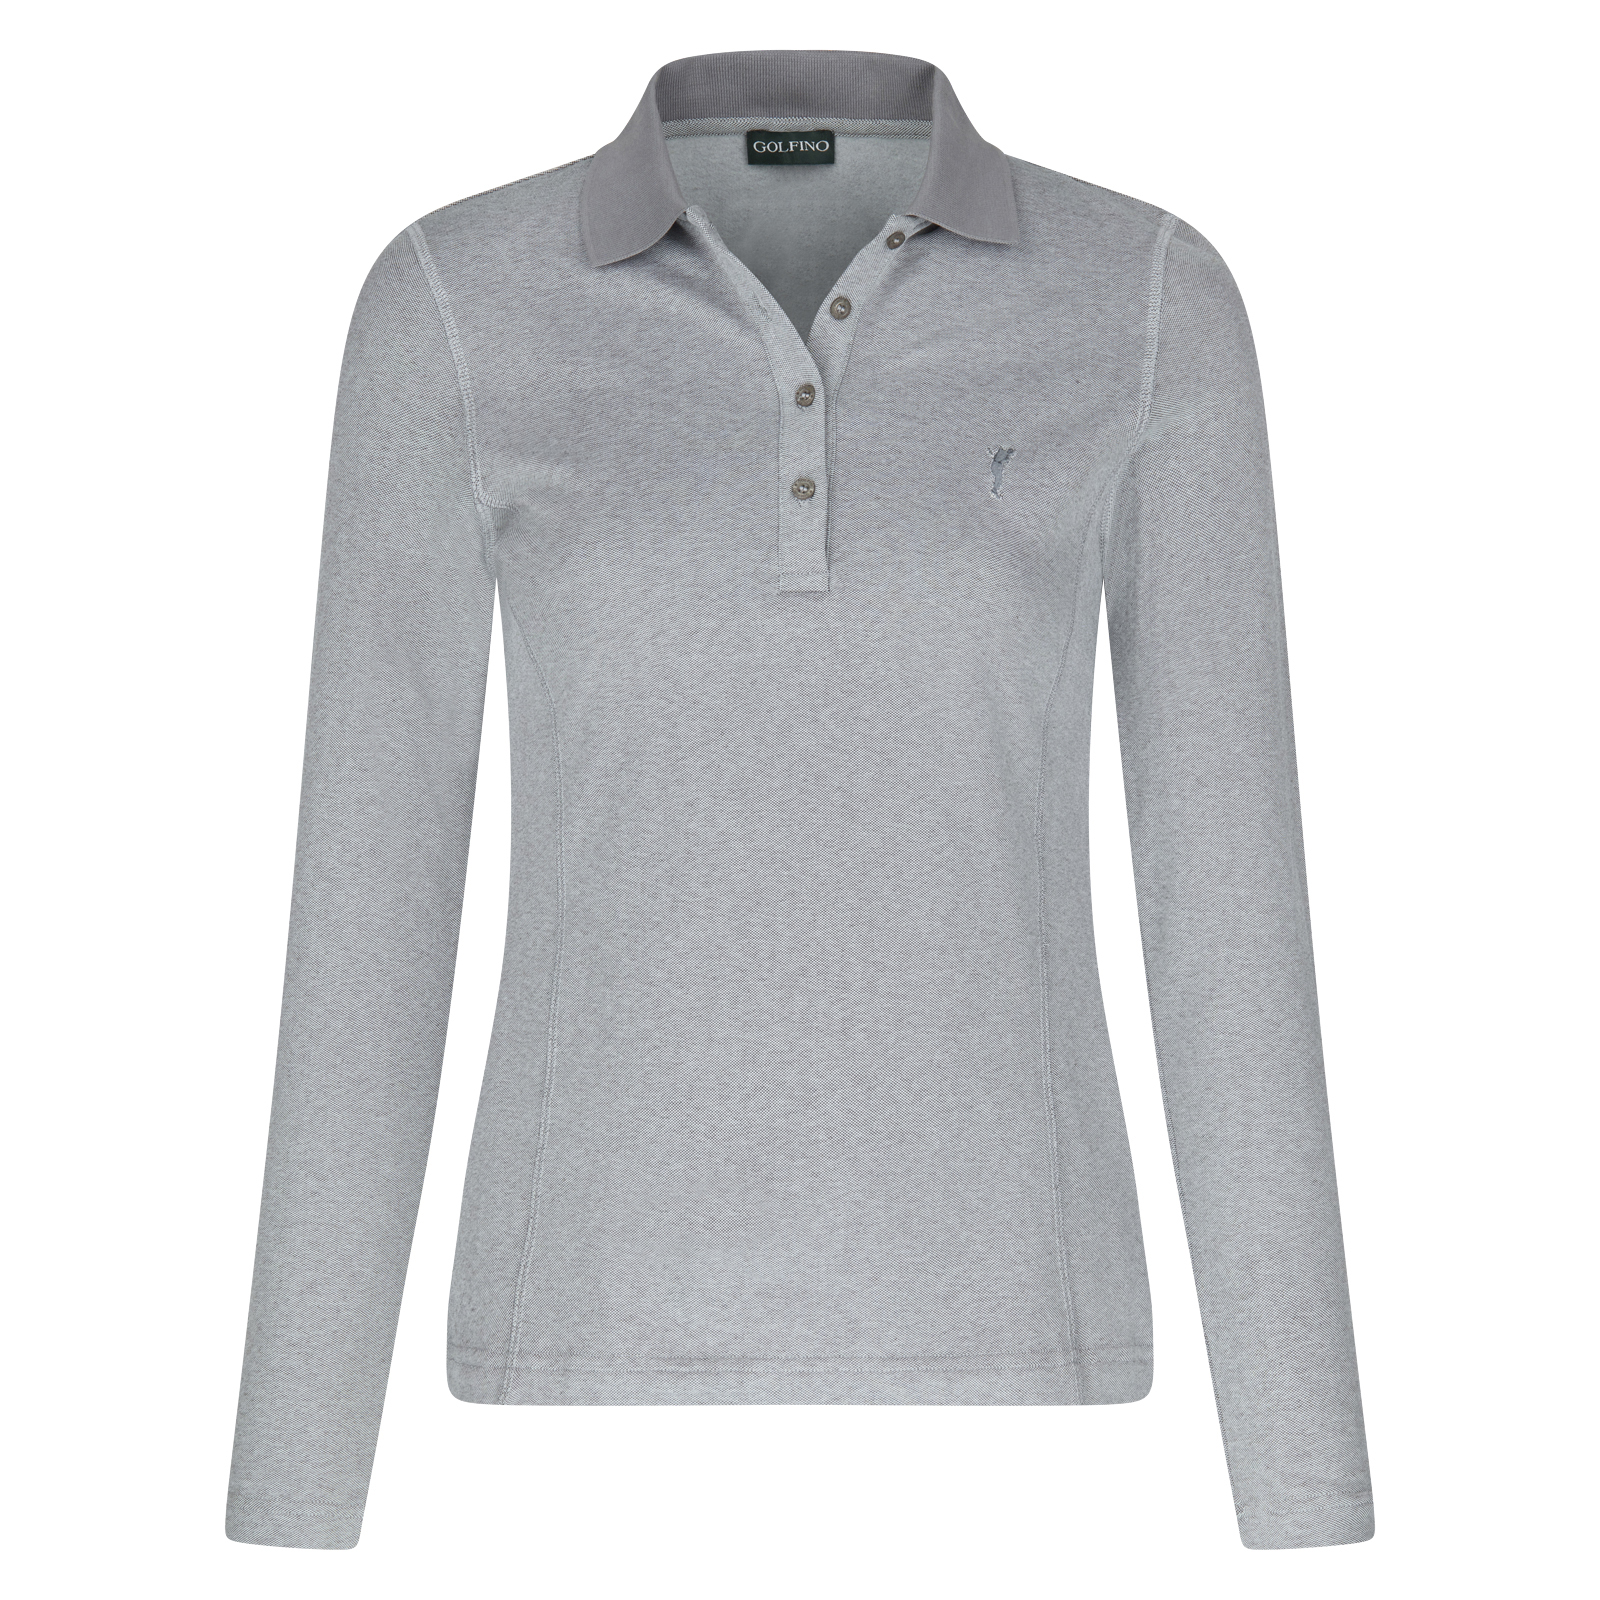 Ladies' long-sleeved polo shirt with ultraviolet protection (UPF)